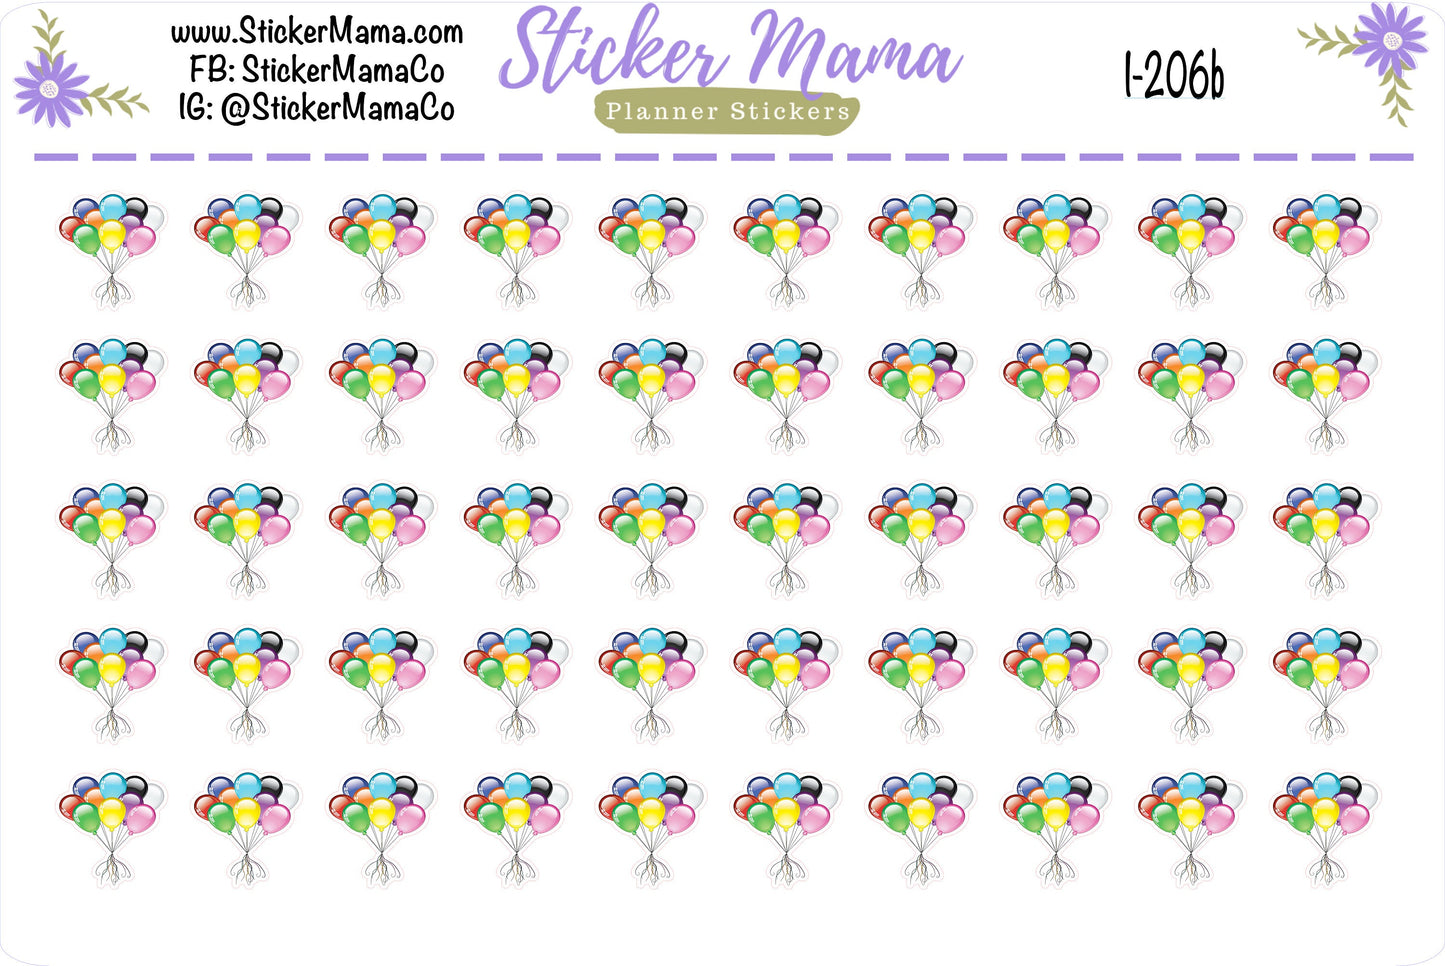 BALLOON PLANNER Stickers I-206 || Balloon Stickers || Stickers for Parties